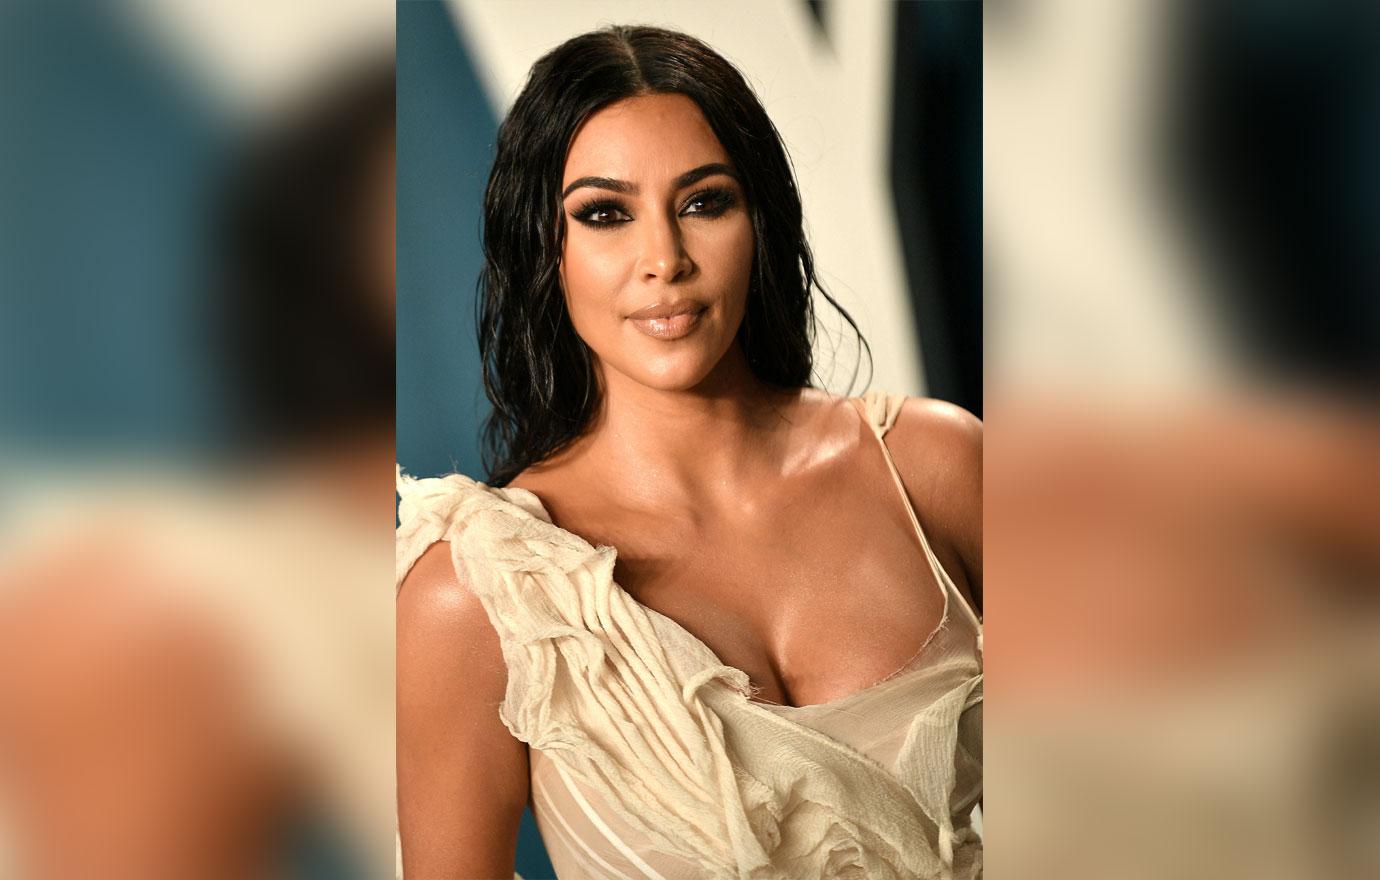 Kim Kardashian West Shares Chicago's Scary High Chair Accident